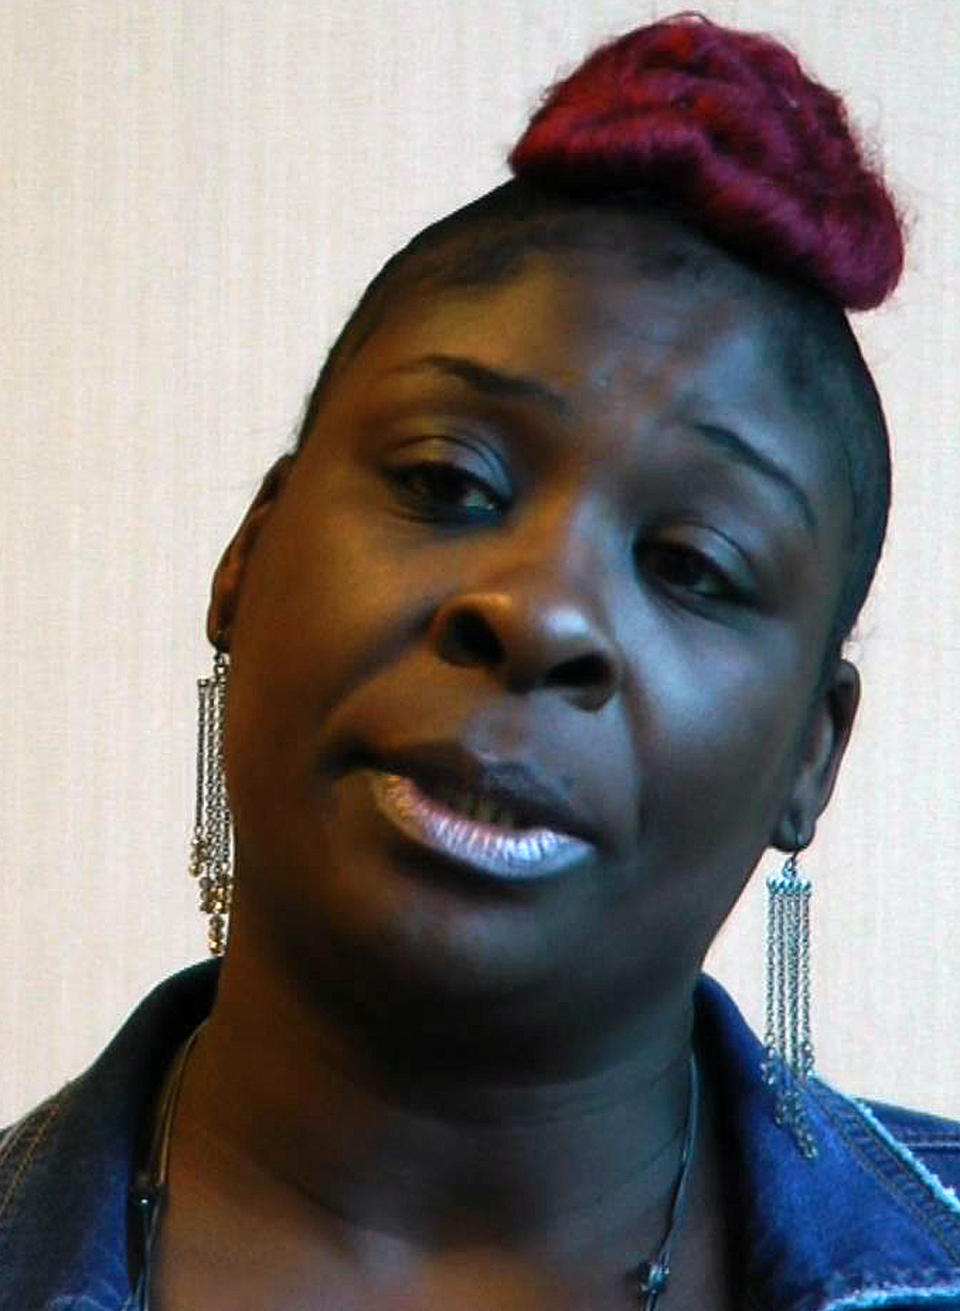 In this still image taken from video, April Pipkins, mother of the late Emantic "EJ" Bradford Jr., speaks during an interview in Birmingham, Ala., on Tuesday, Nov. 27, 2018. Bradford was shot to death by a police officer in a shopping mall on Thanksgiving night, and Pipkins said she believes her son would still be alive had he been white. (AP Photo/Jay Reeves)